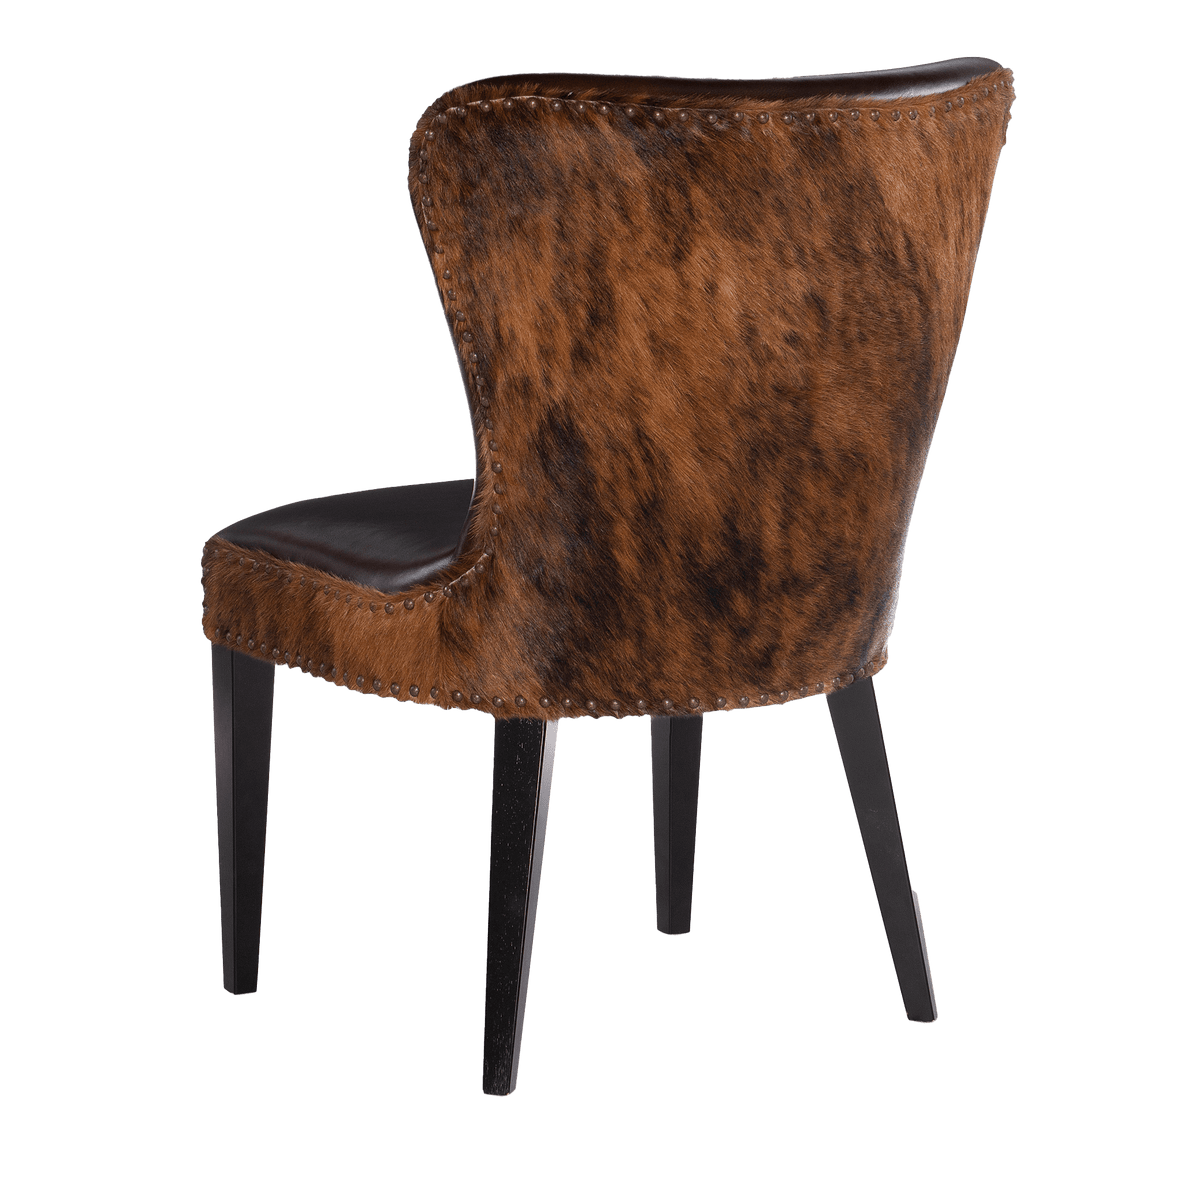 Kano Leather Upholstered Accent Chair - Coja